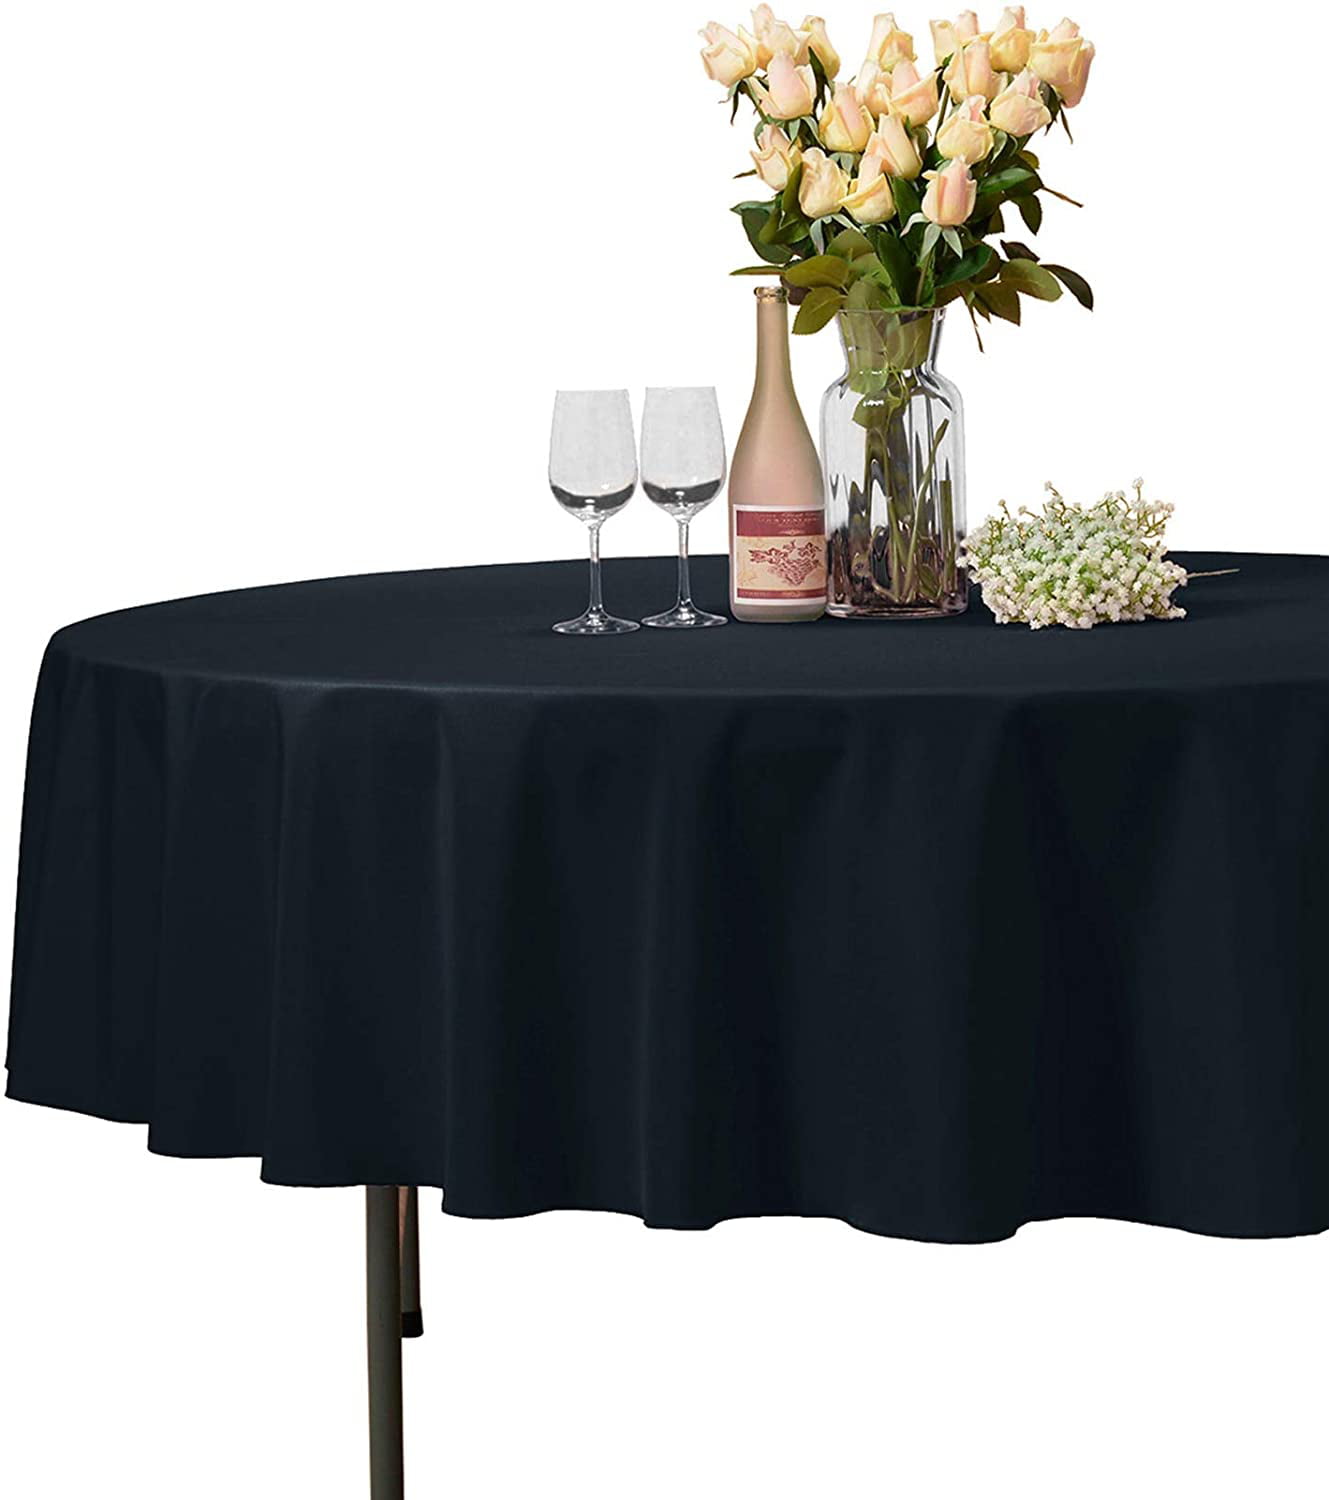 Table Cloths Square 54 x 54 Wrinkle Free Kitchen Table Clothes Cat Tablecloth for Buffet Table Wedding & More Parties Holiday Dinner 